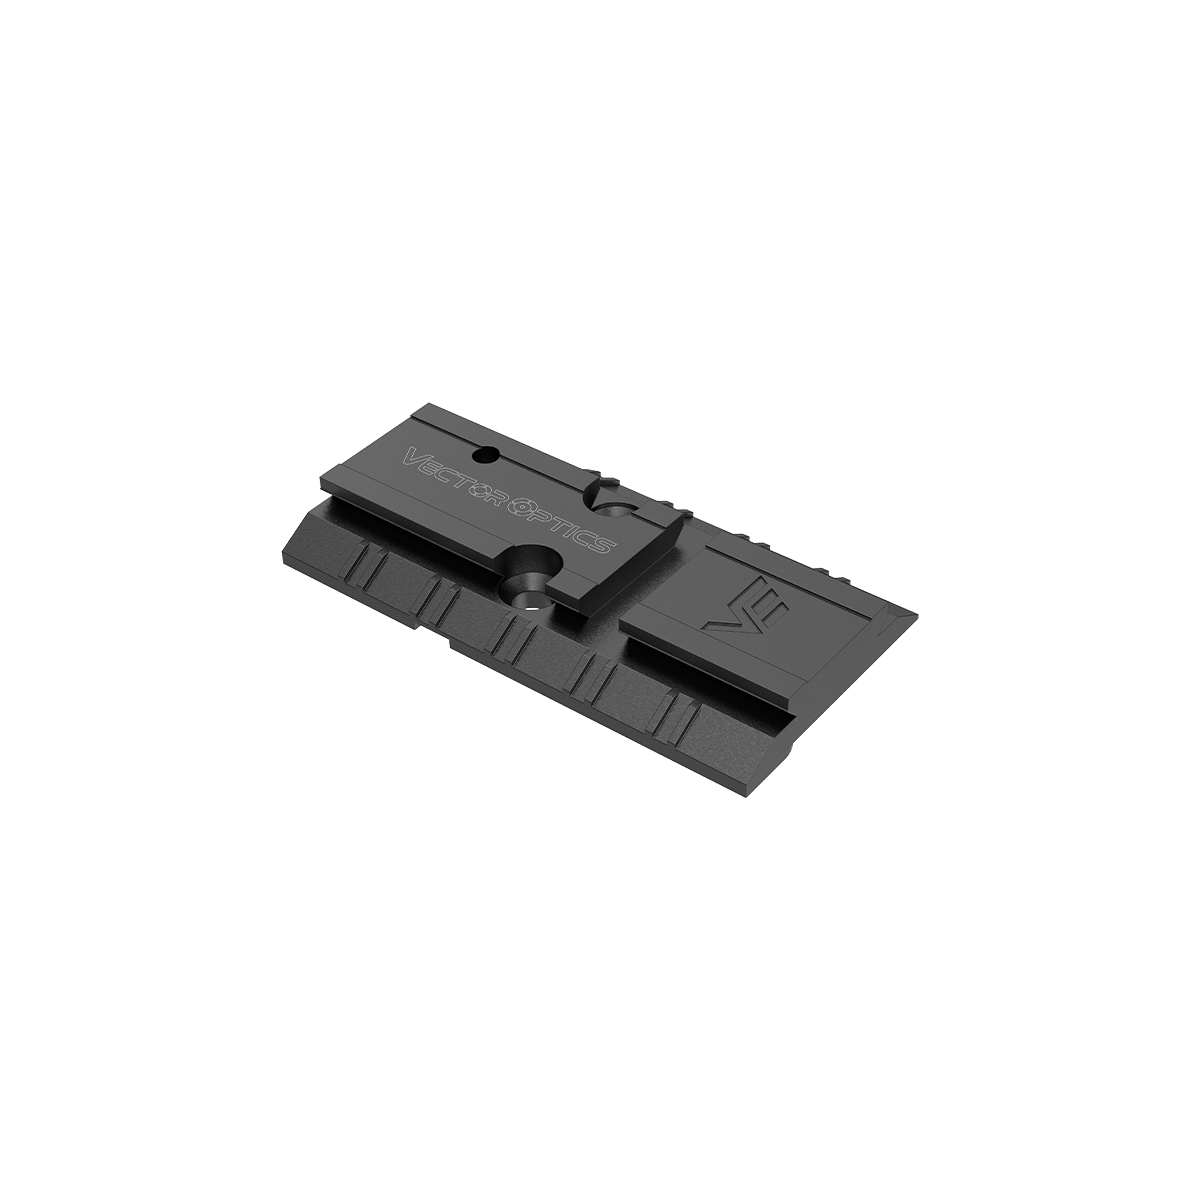 Enclosed Red Dot Mount - VOD for CZ Pistols